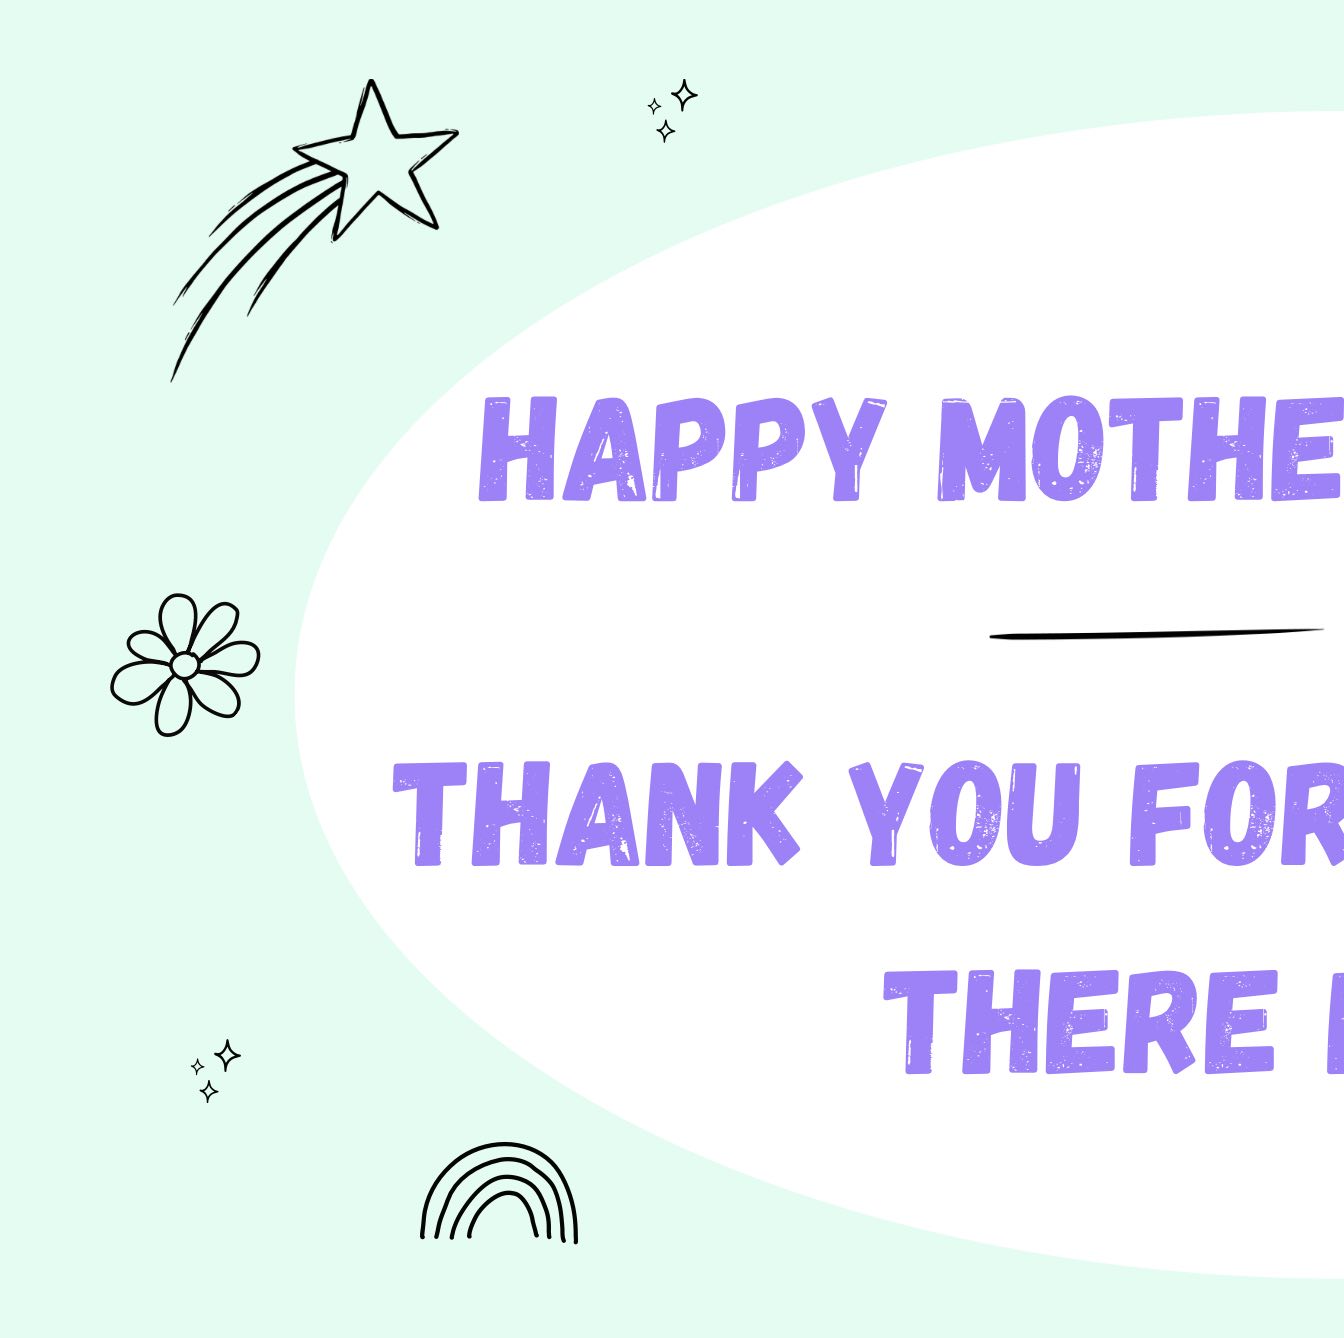 Thanks for Being There (Mother’s Day)